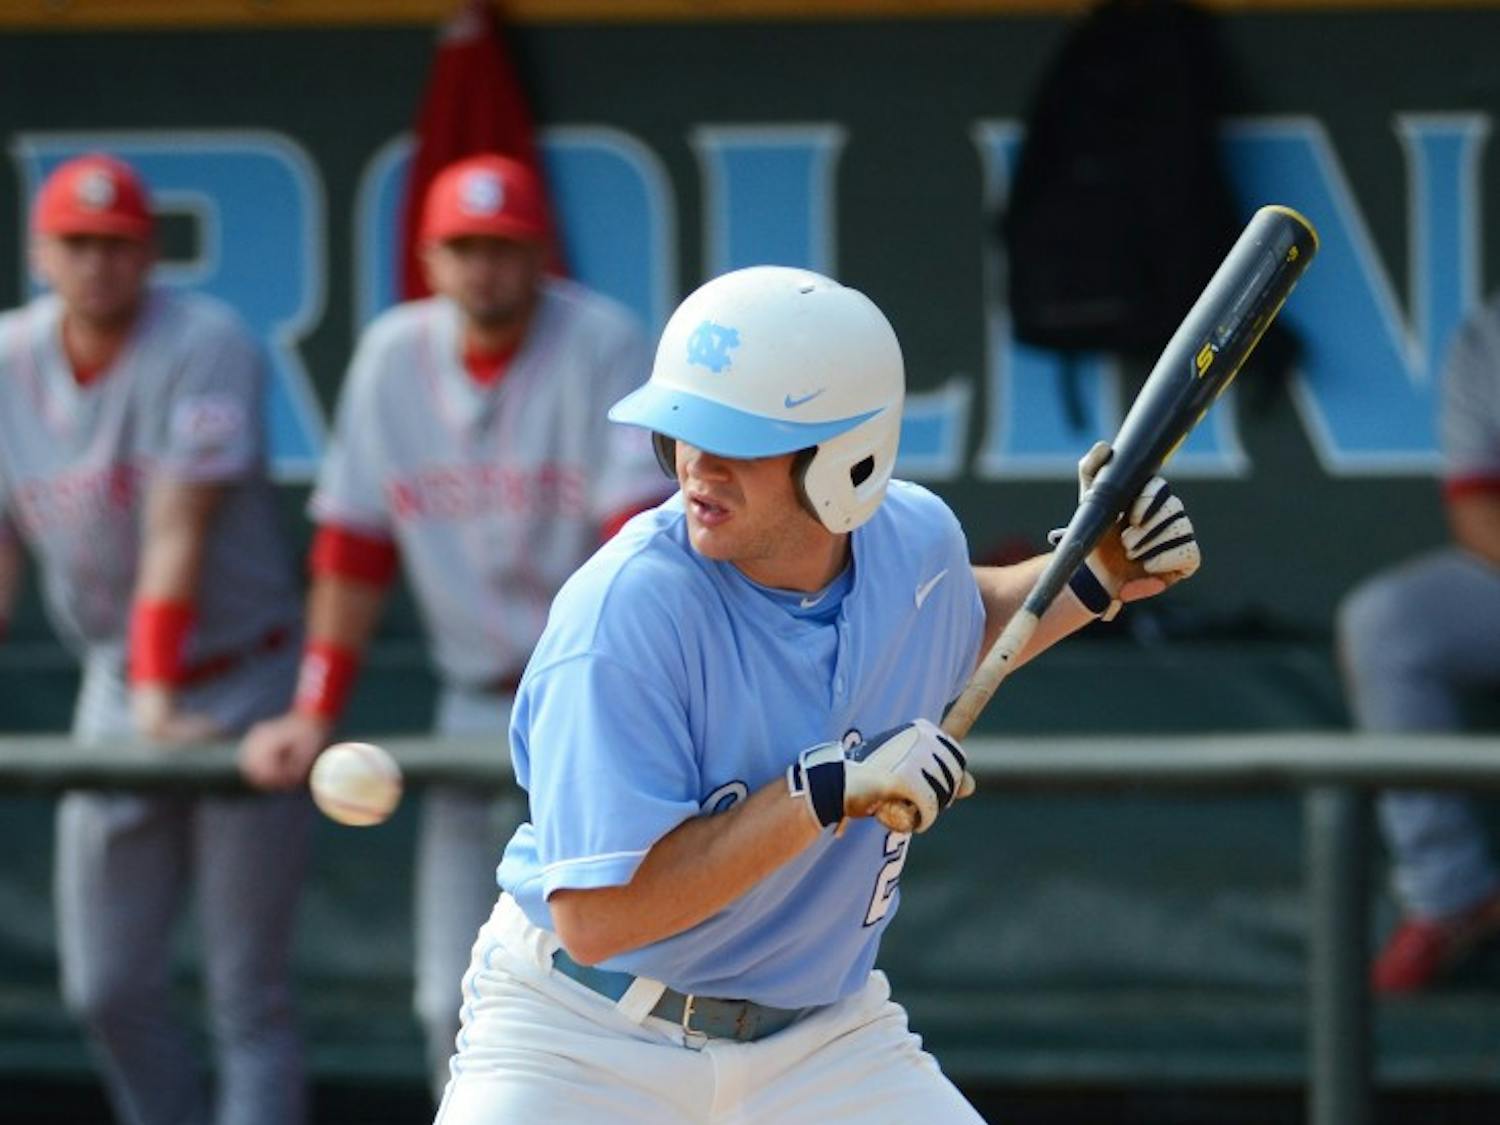 Junior Chaz Frank pulls back his bat at a called ball in Carolina's 3-1 loss to NC State at Boshamer Stadium in Chapel Hill Saturday, March 24th. 